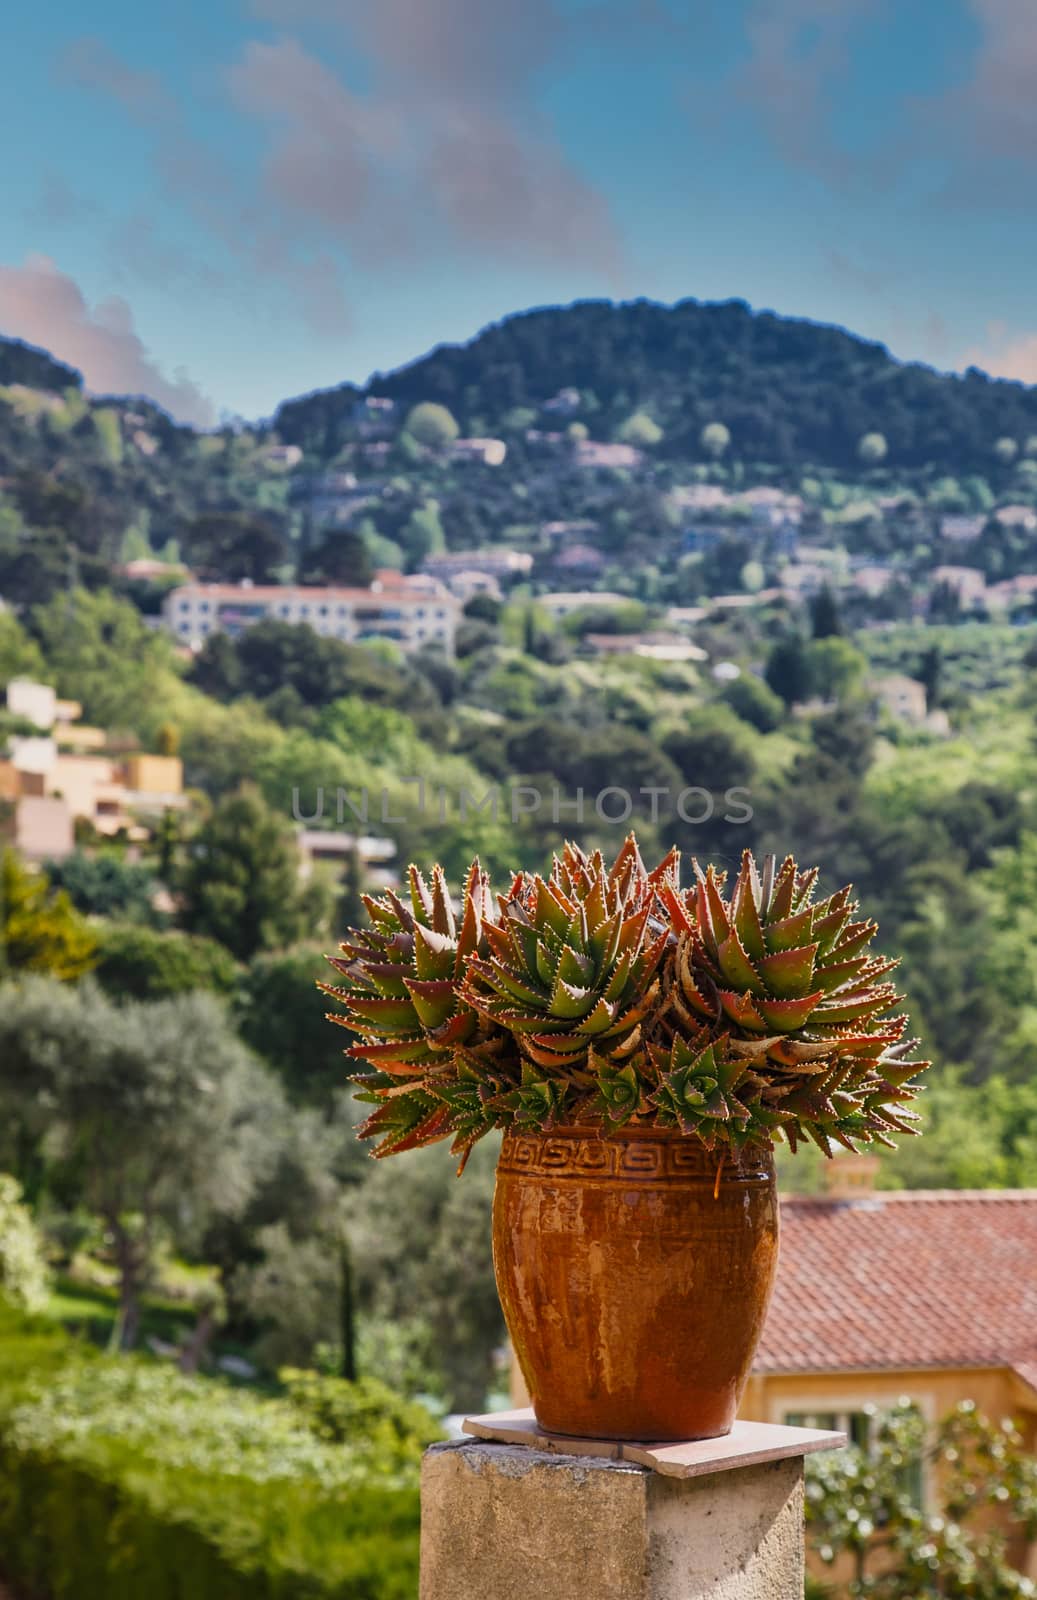 Cactus in cermic jar with French countryside in background